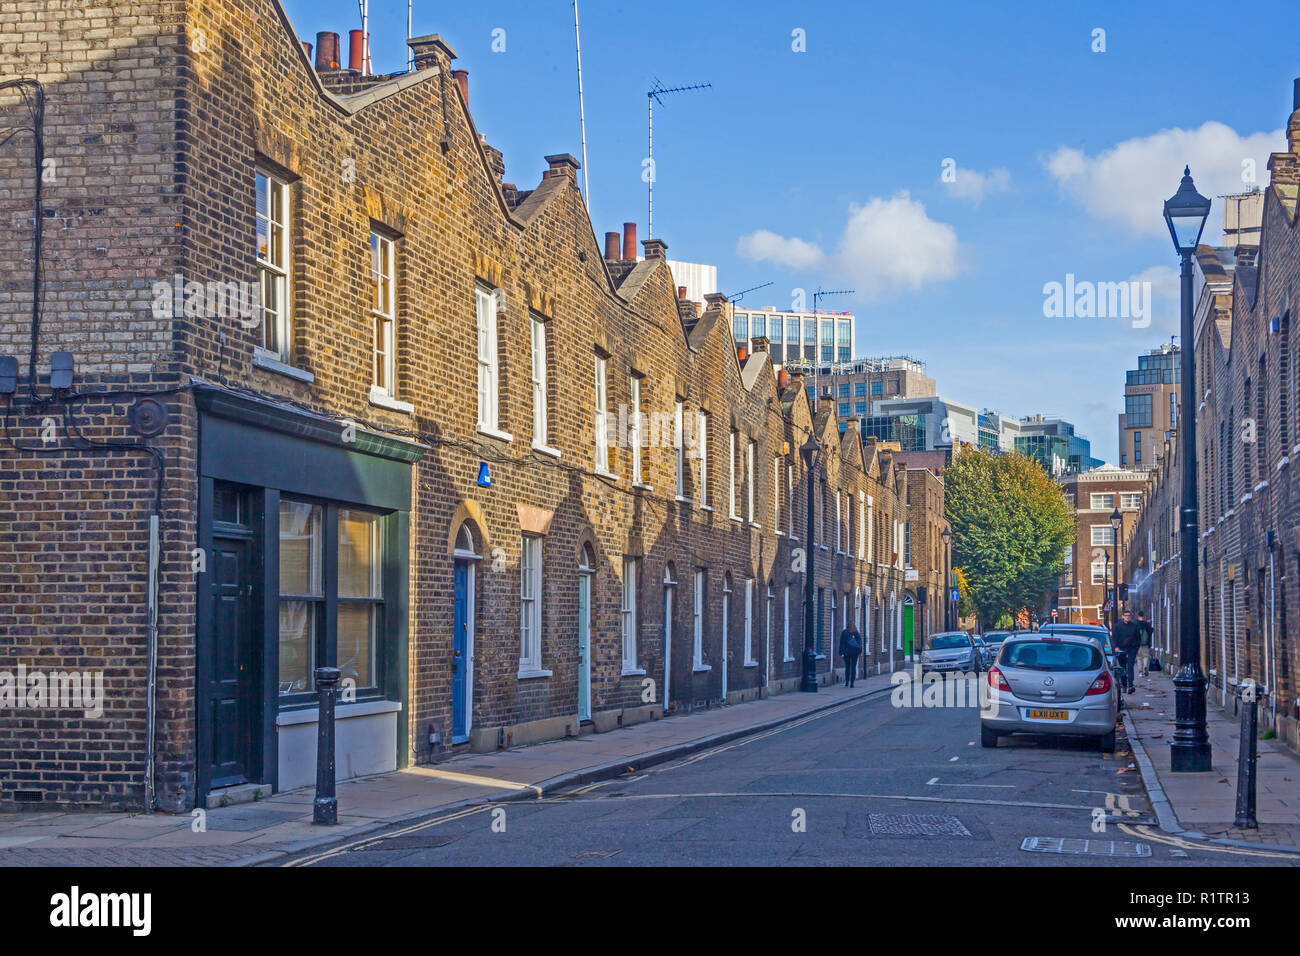 London, Waterloo.  Grade II listed Georgian workers' cottages in  a section of historic Roupell Street, dating from 1830. Stock Photo